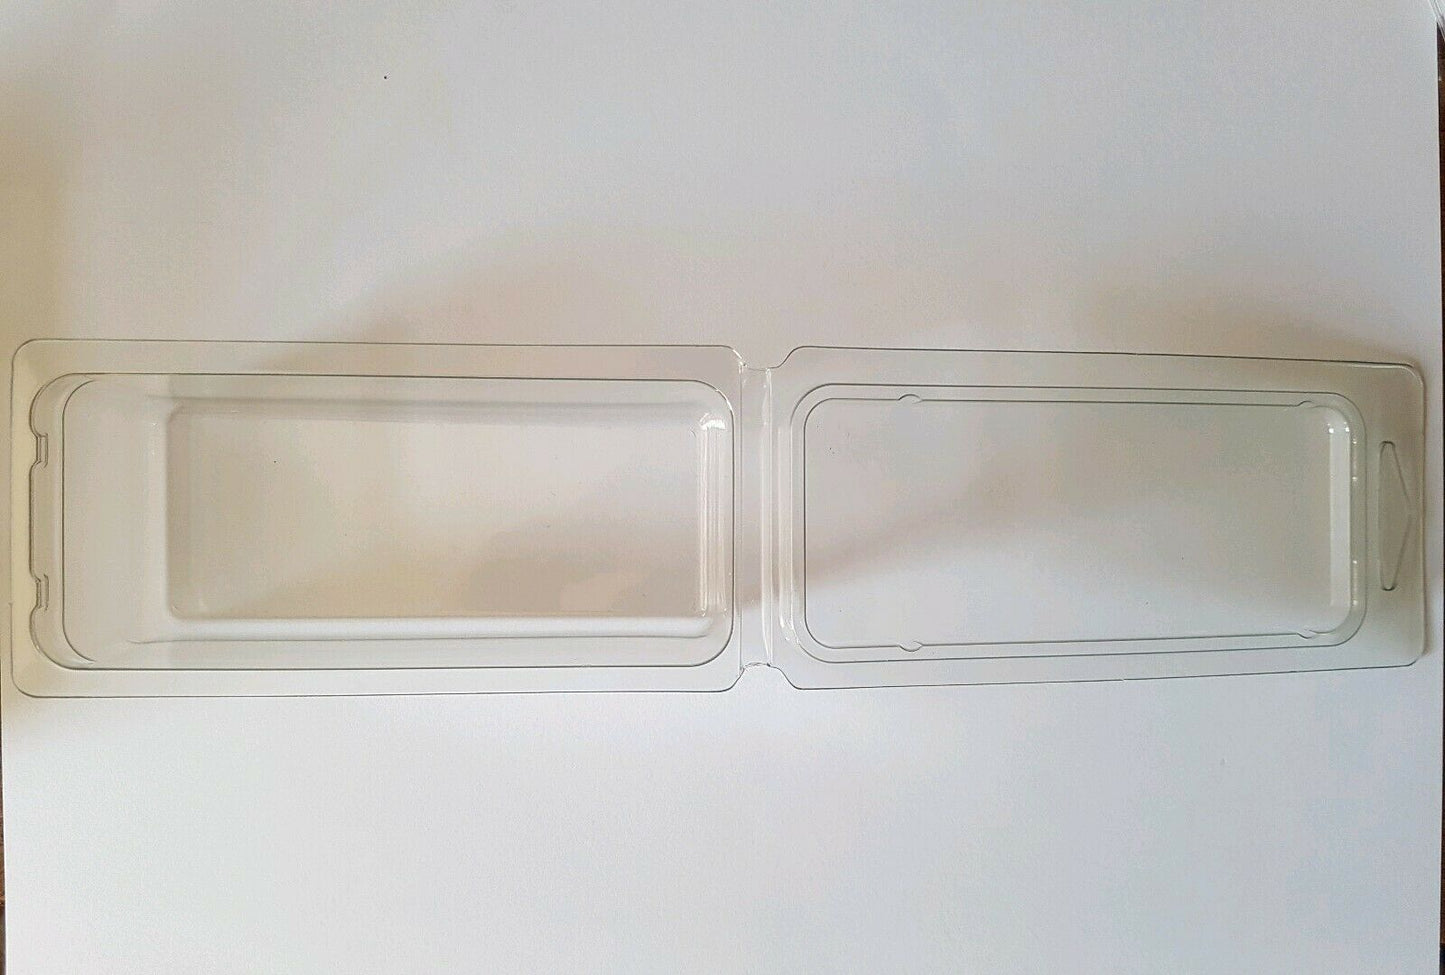 3.75" Action Figure Blister Protective Clamshell Case